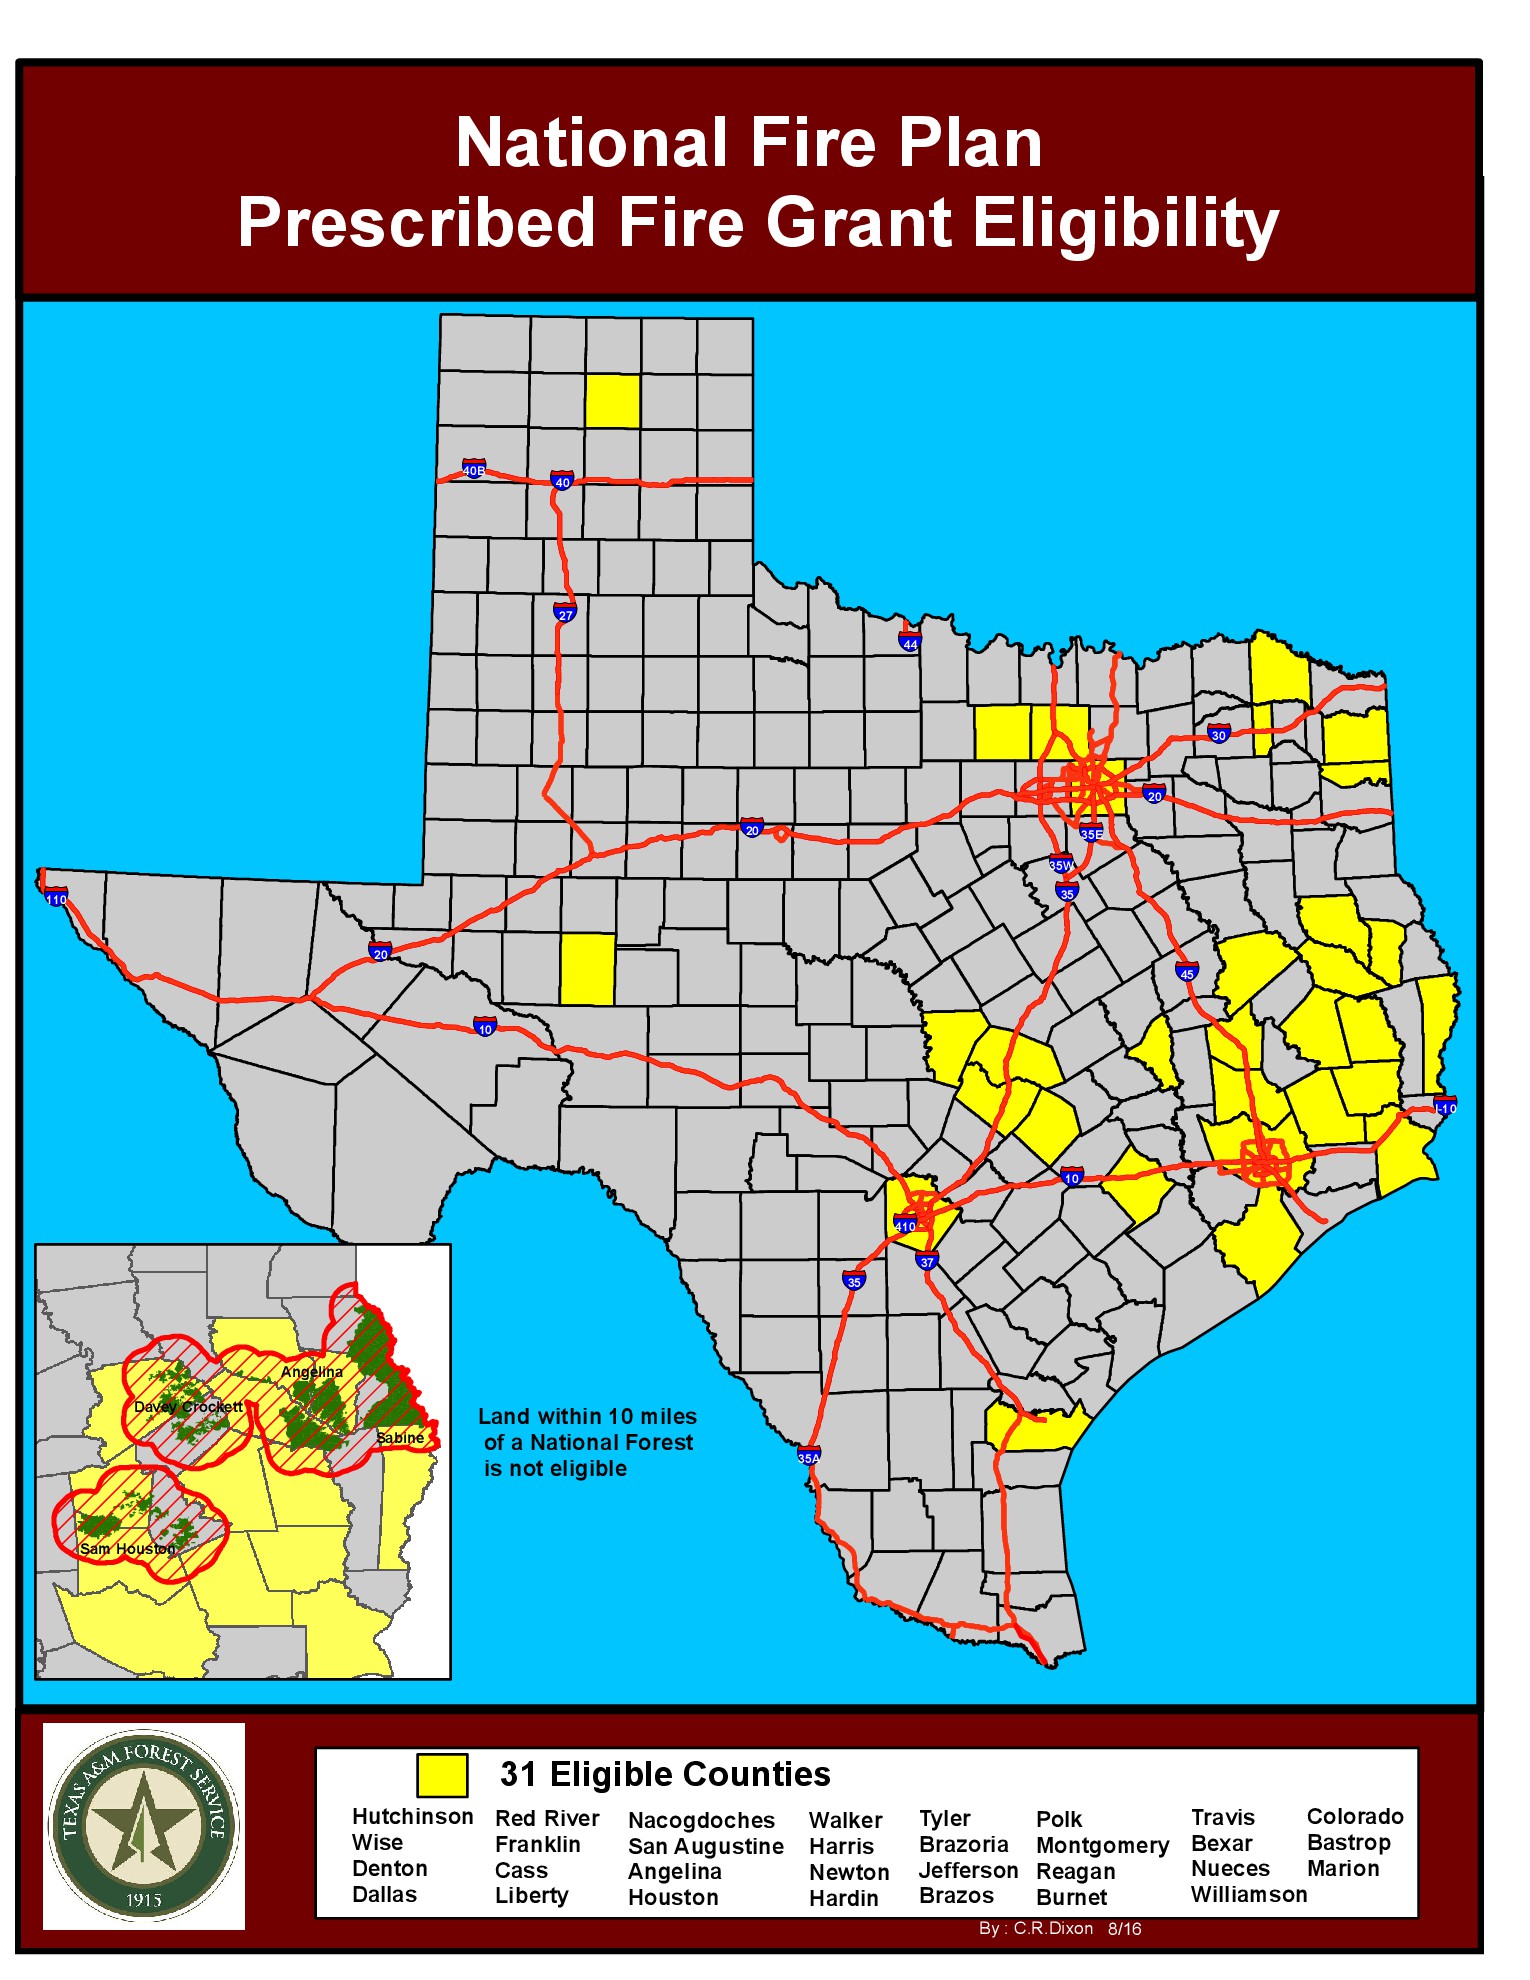 National Fire Plan Grant Eligible Counties